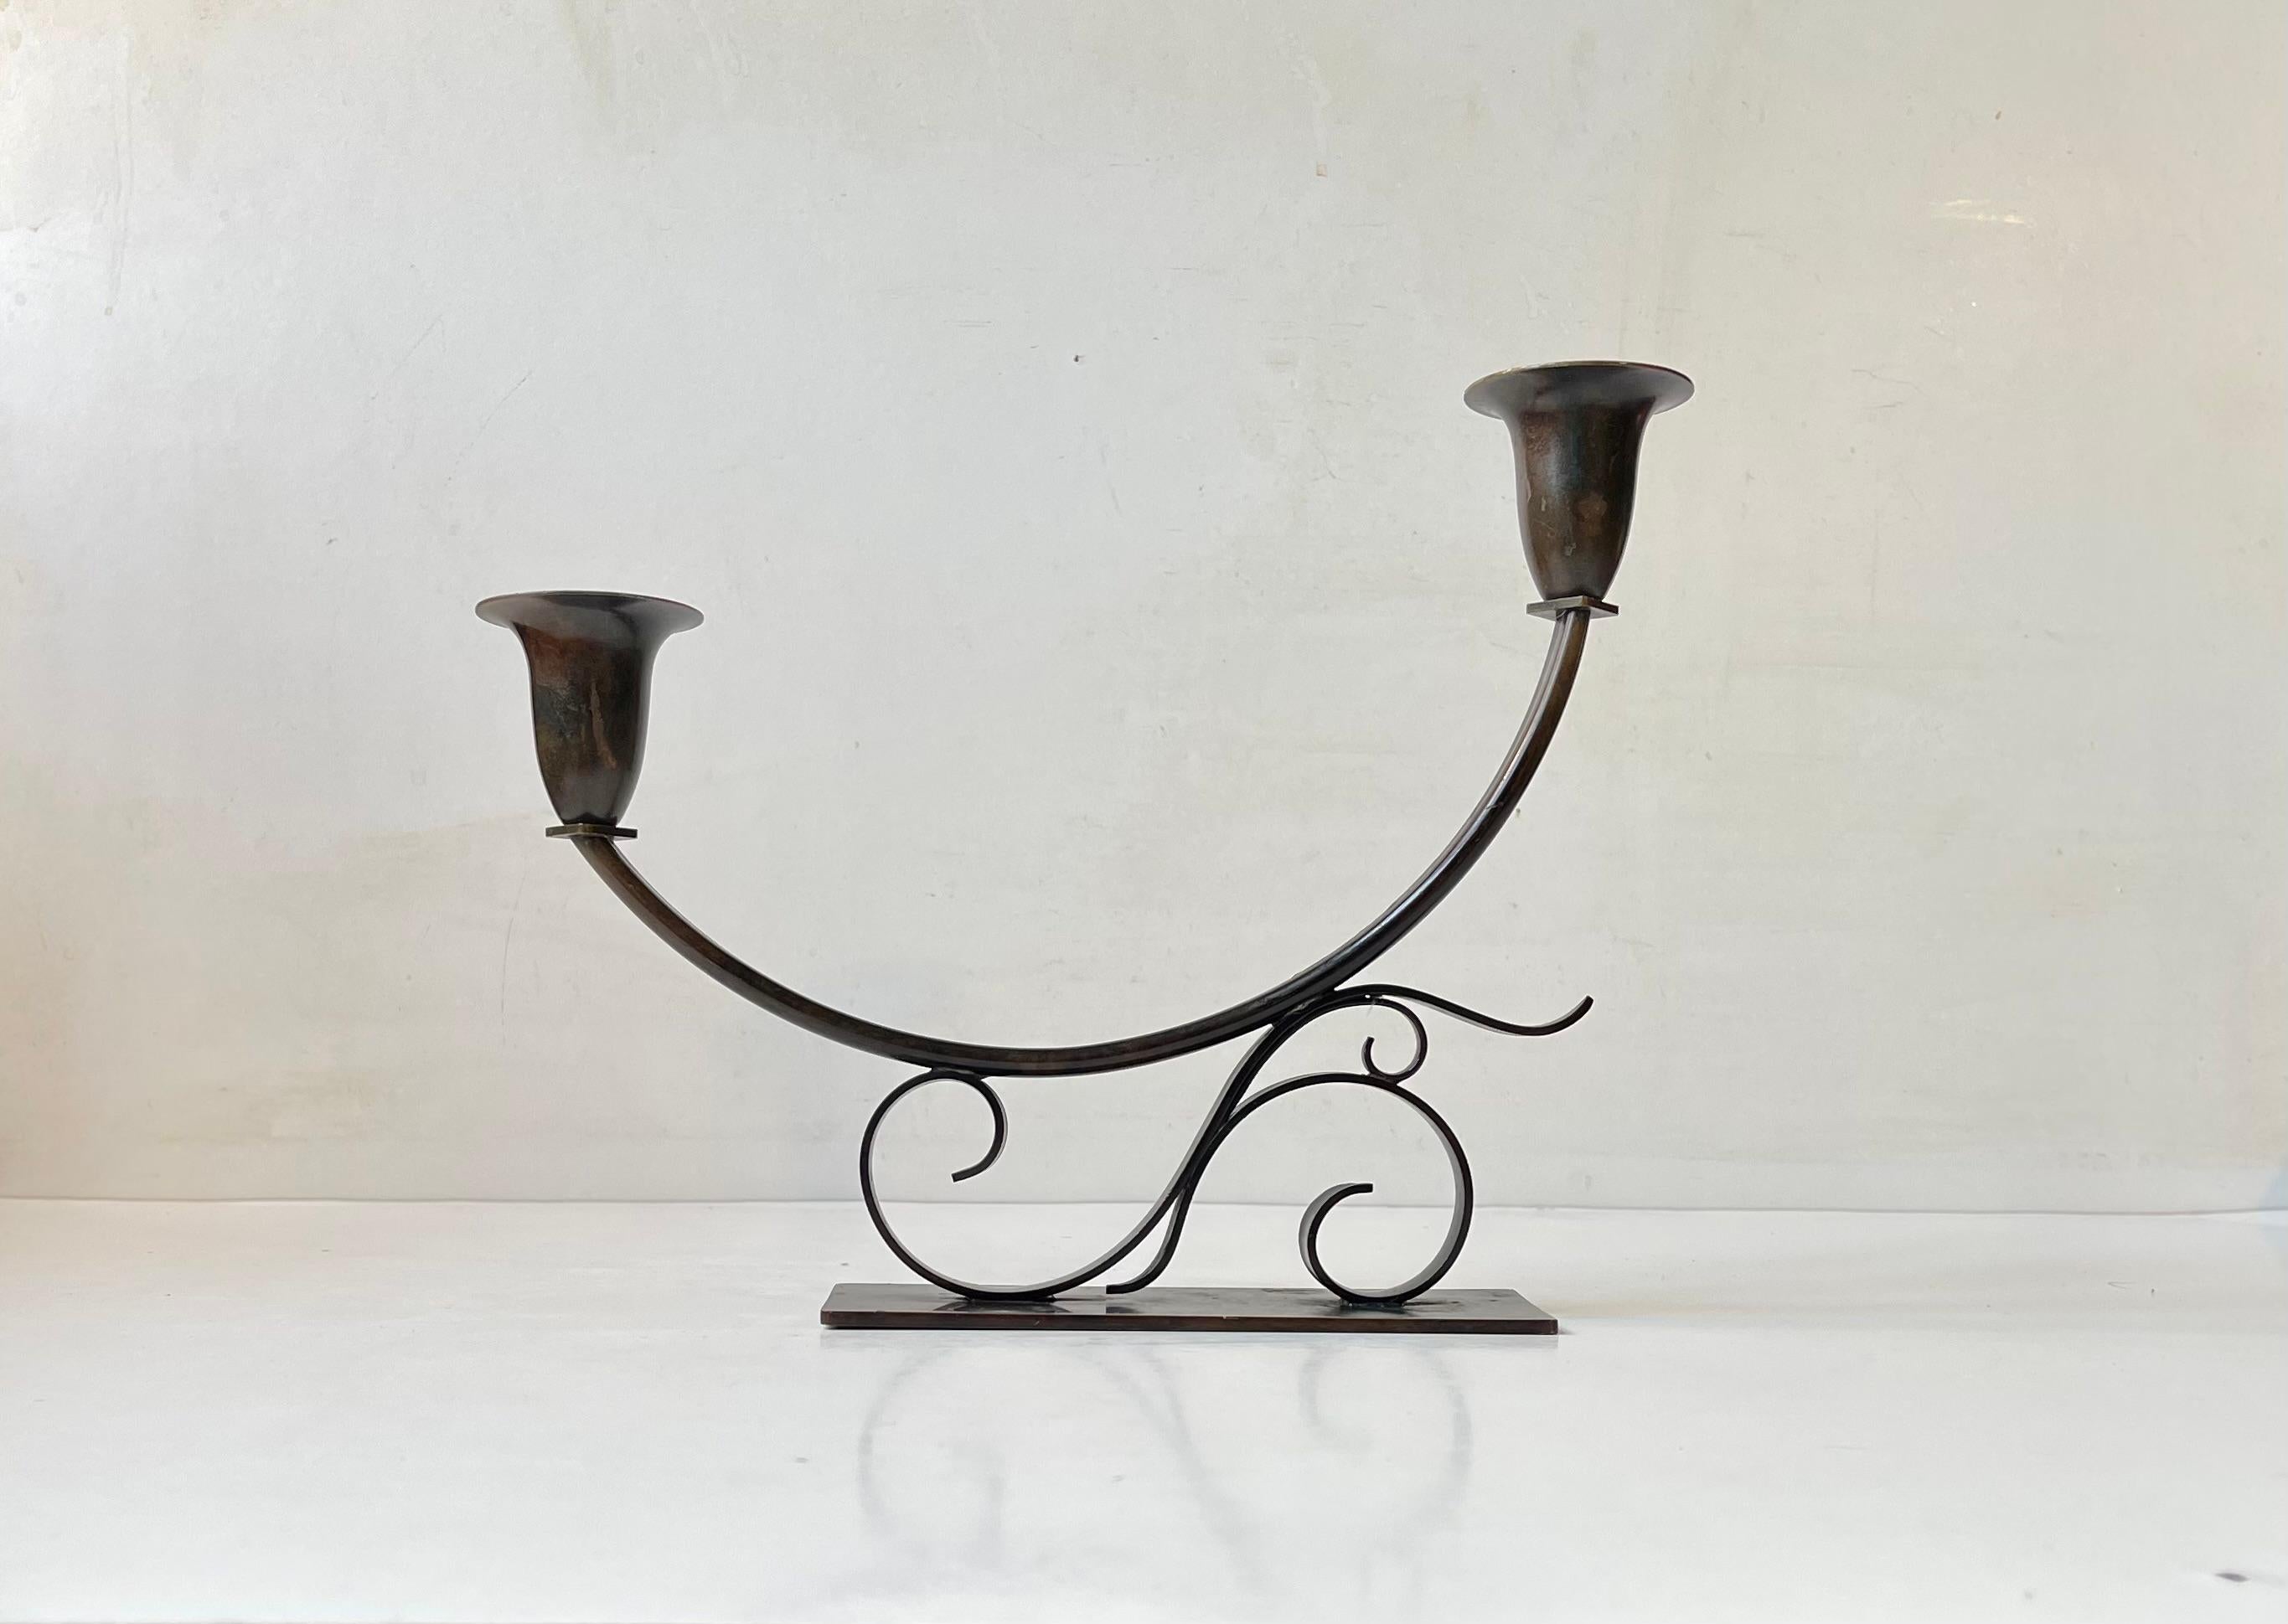 Stylized patinated bronze candelabra made by Holger Fredericia and manufactured in Denmark during the early 1930s. Art Nouveau inspired ornamentation. Brilliant for shallow interiors: mantle, window and hallway sills etc. Is to fitted with 2 regular